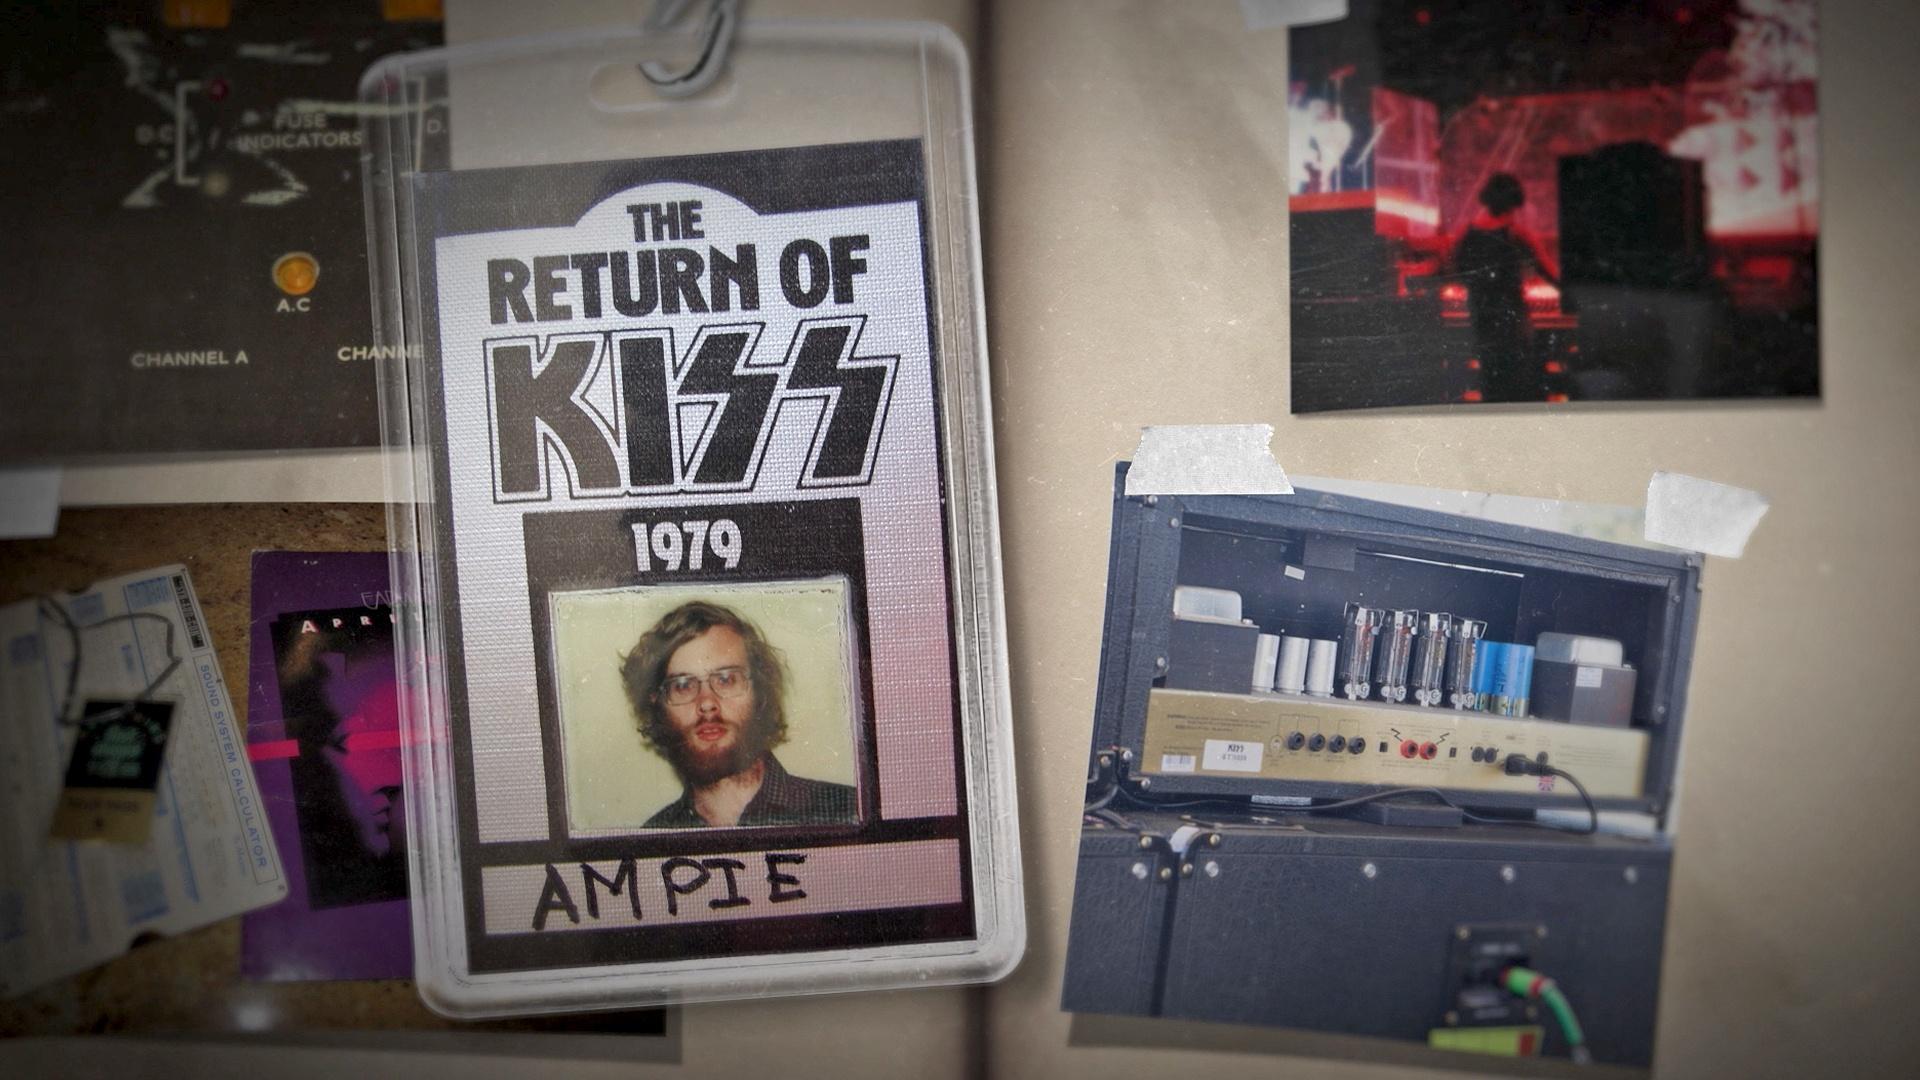 John Elder Robison's ID for his job working for the band Kiss.